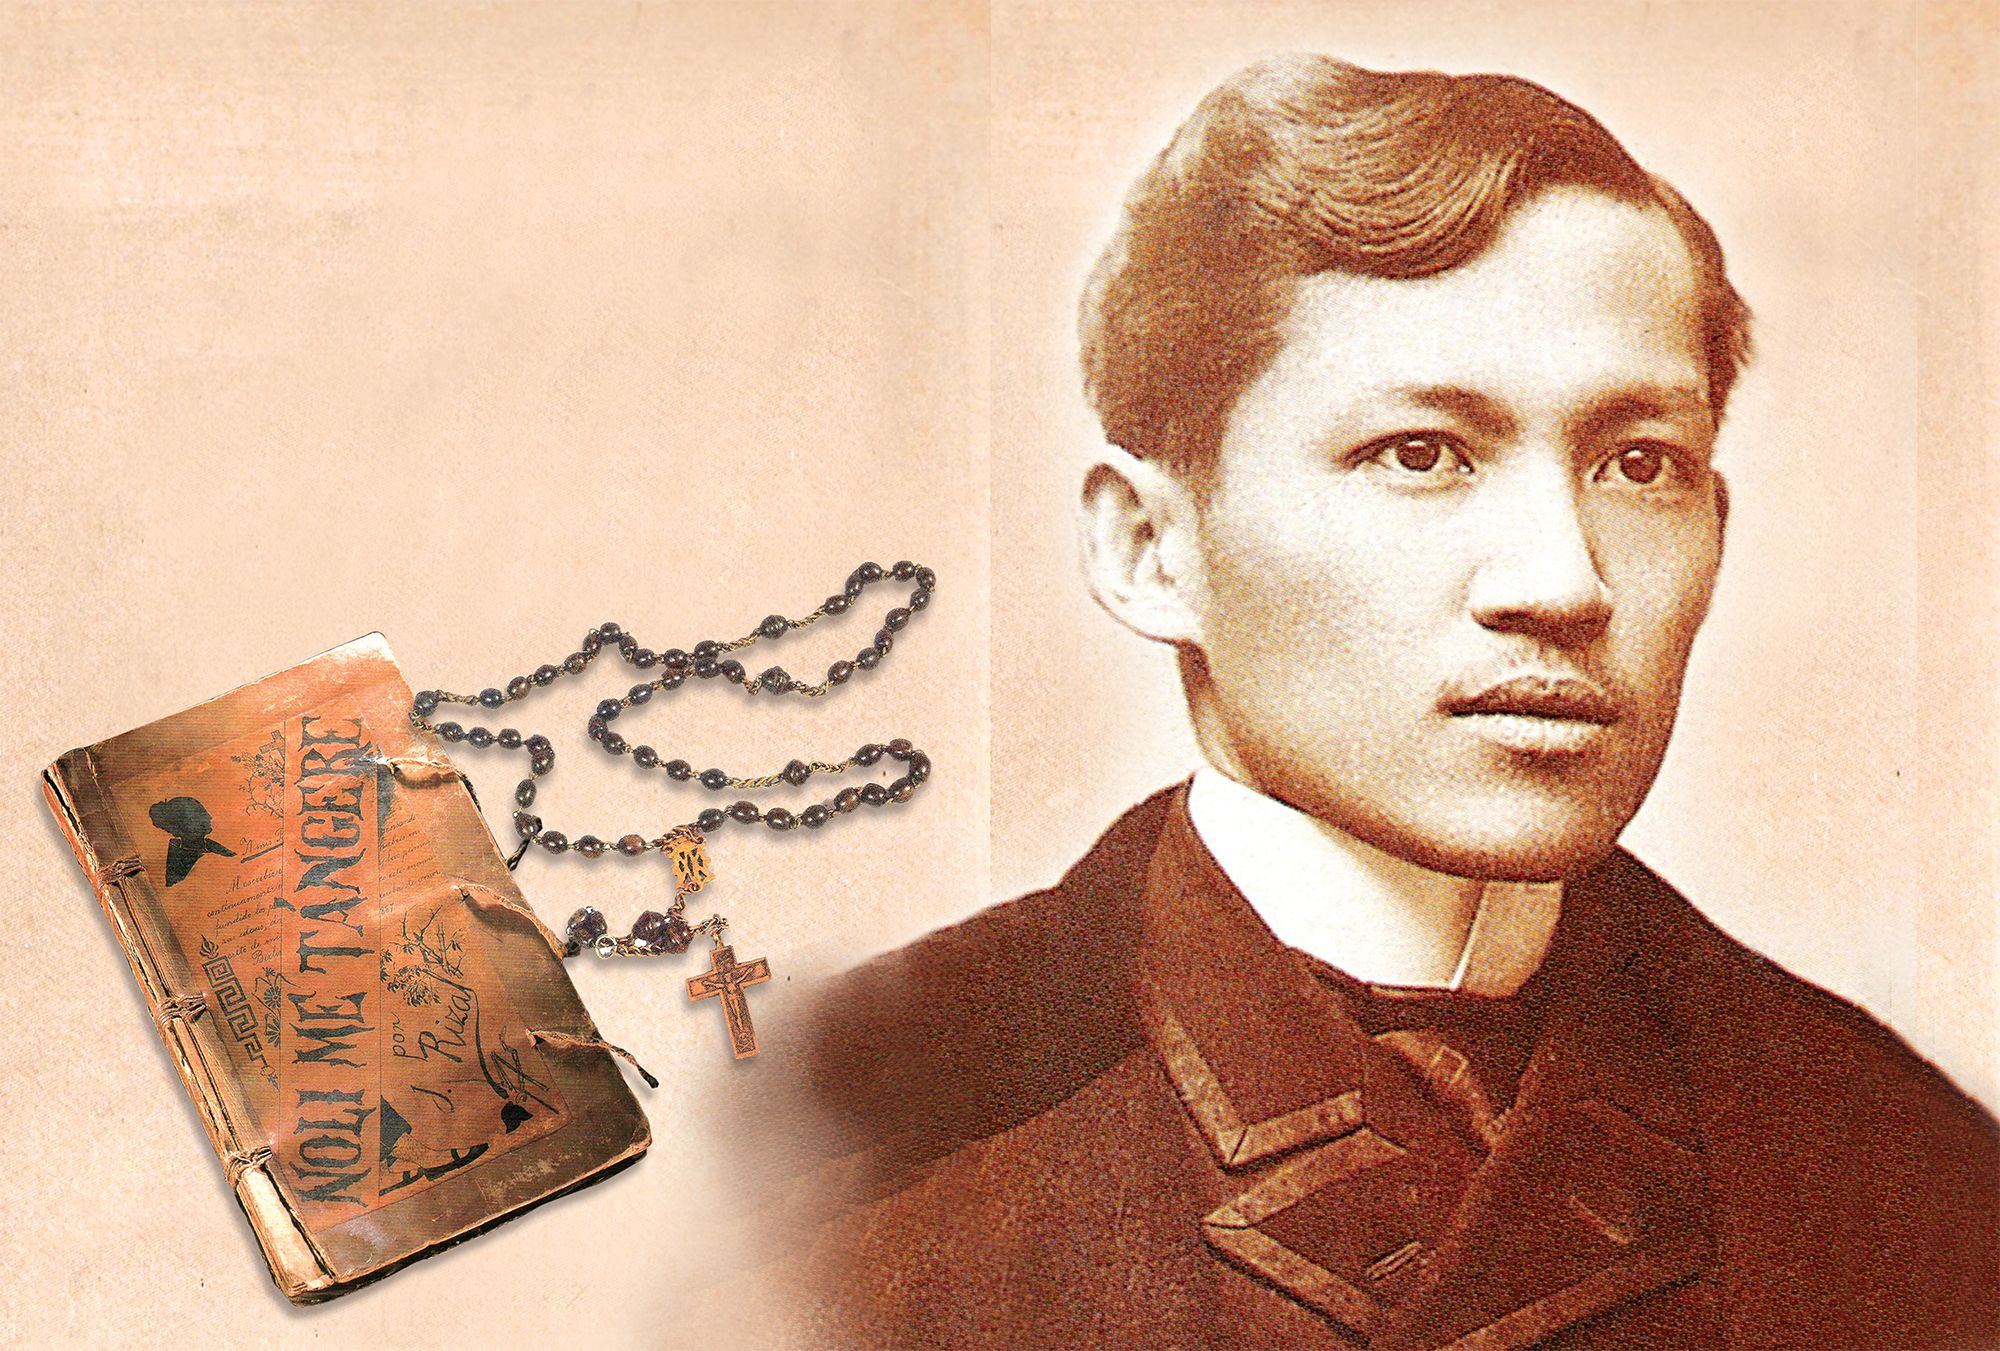 LIFE, WORKS AND WRITINGS OF RIZAL